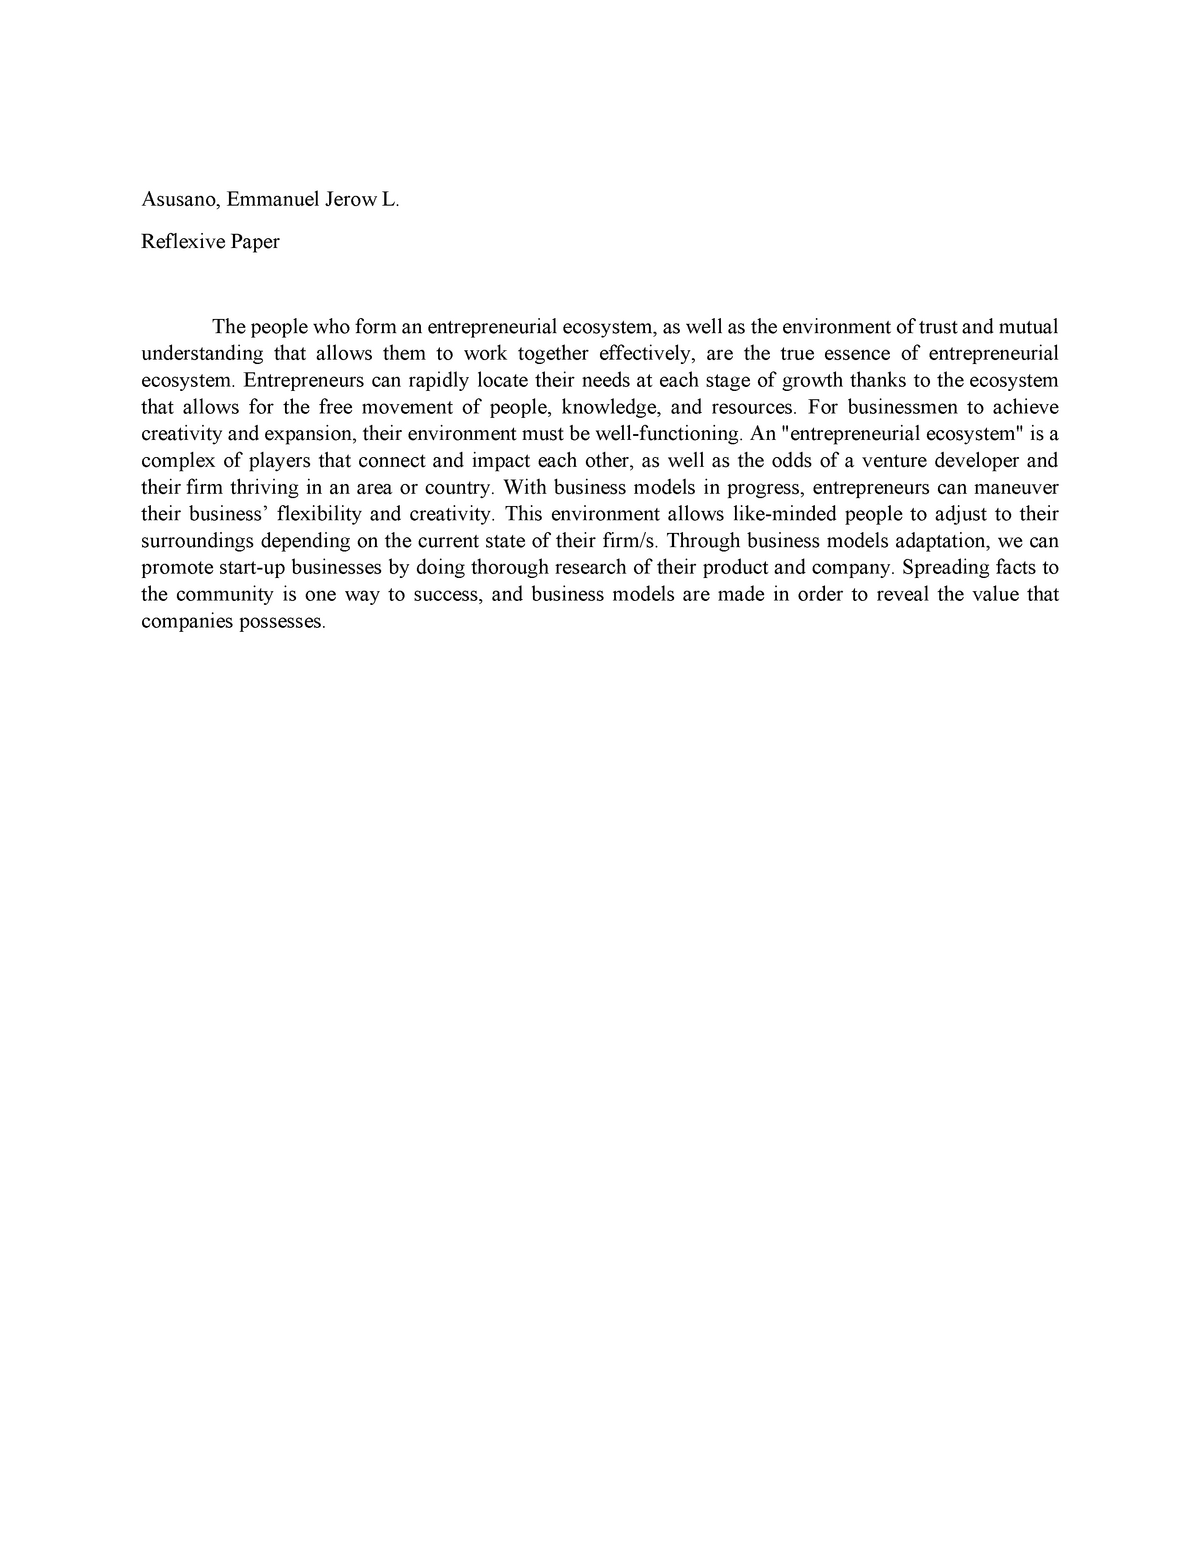 Asusano Reflexive-Paper In the development of accounting data for ...